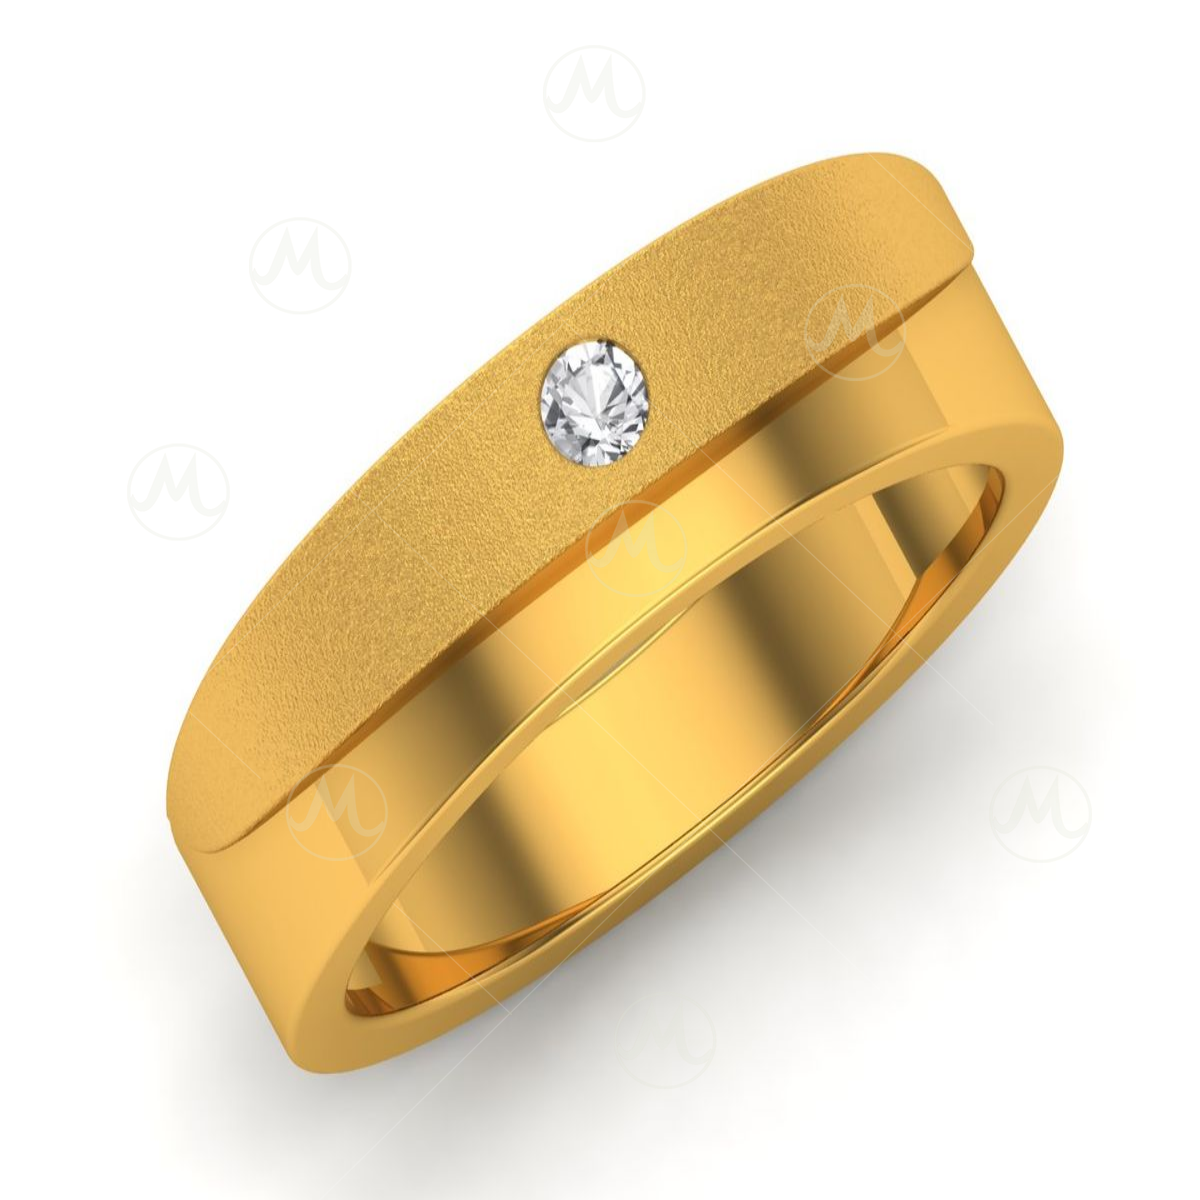 s925 sterling silver adjustable couple ring| Alibaba.com